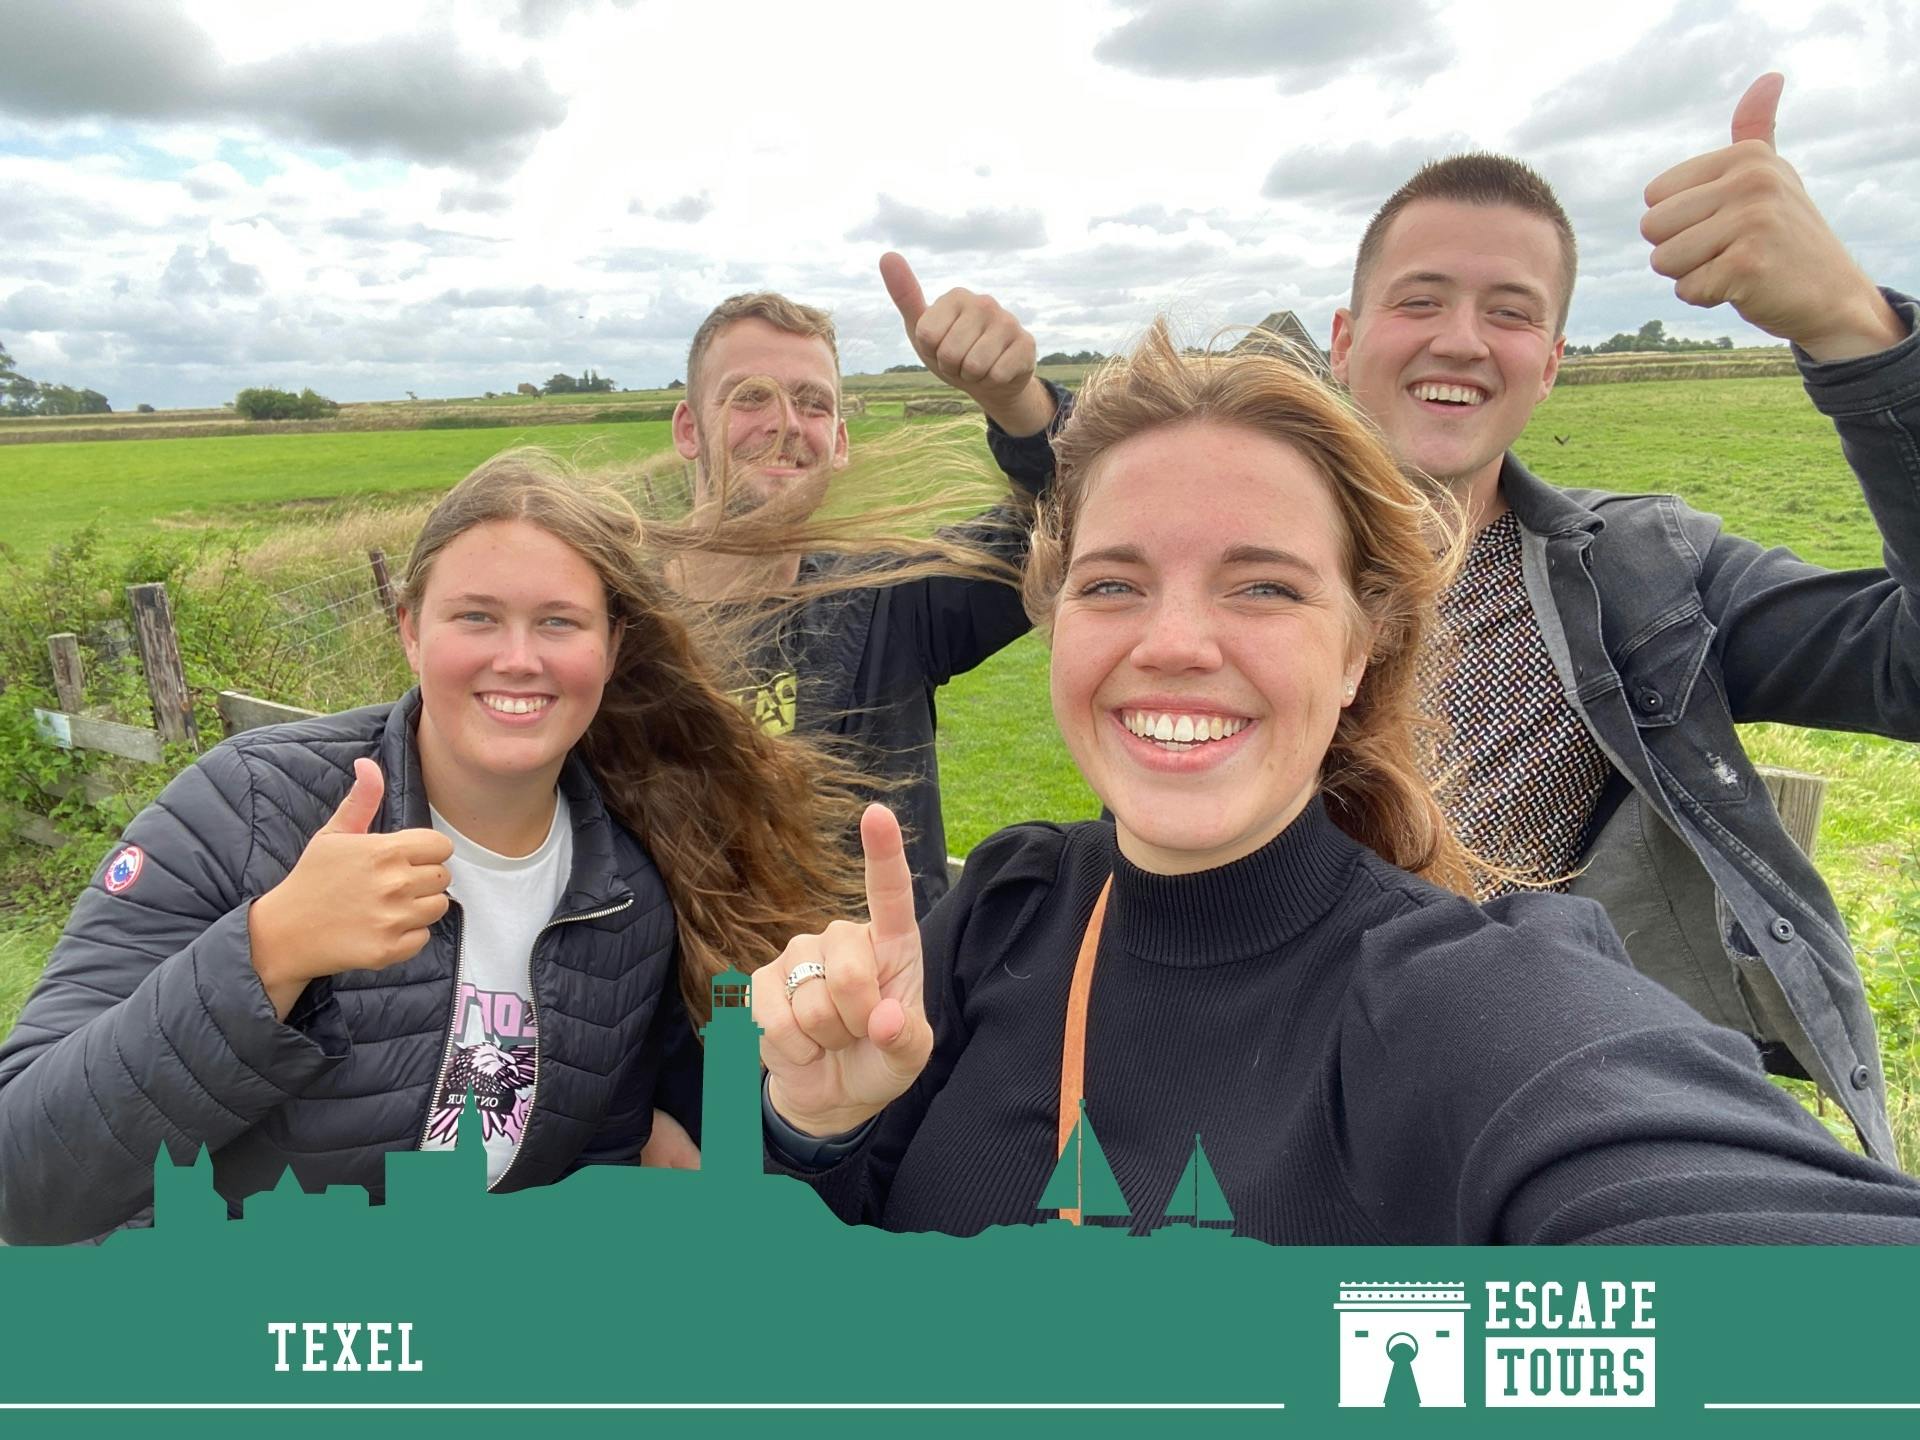 Escape Tour self-guided, interactive city challenge on Texel